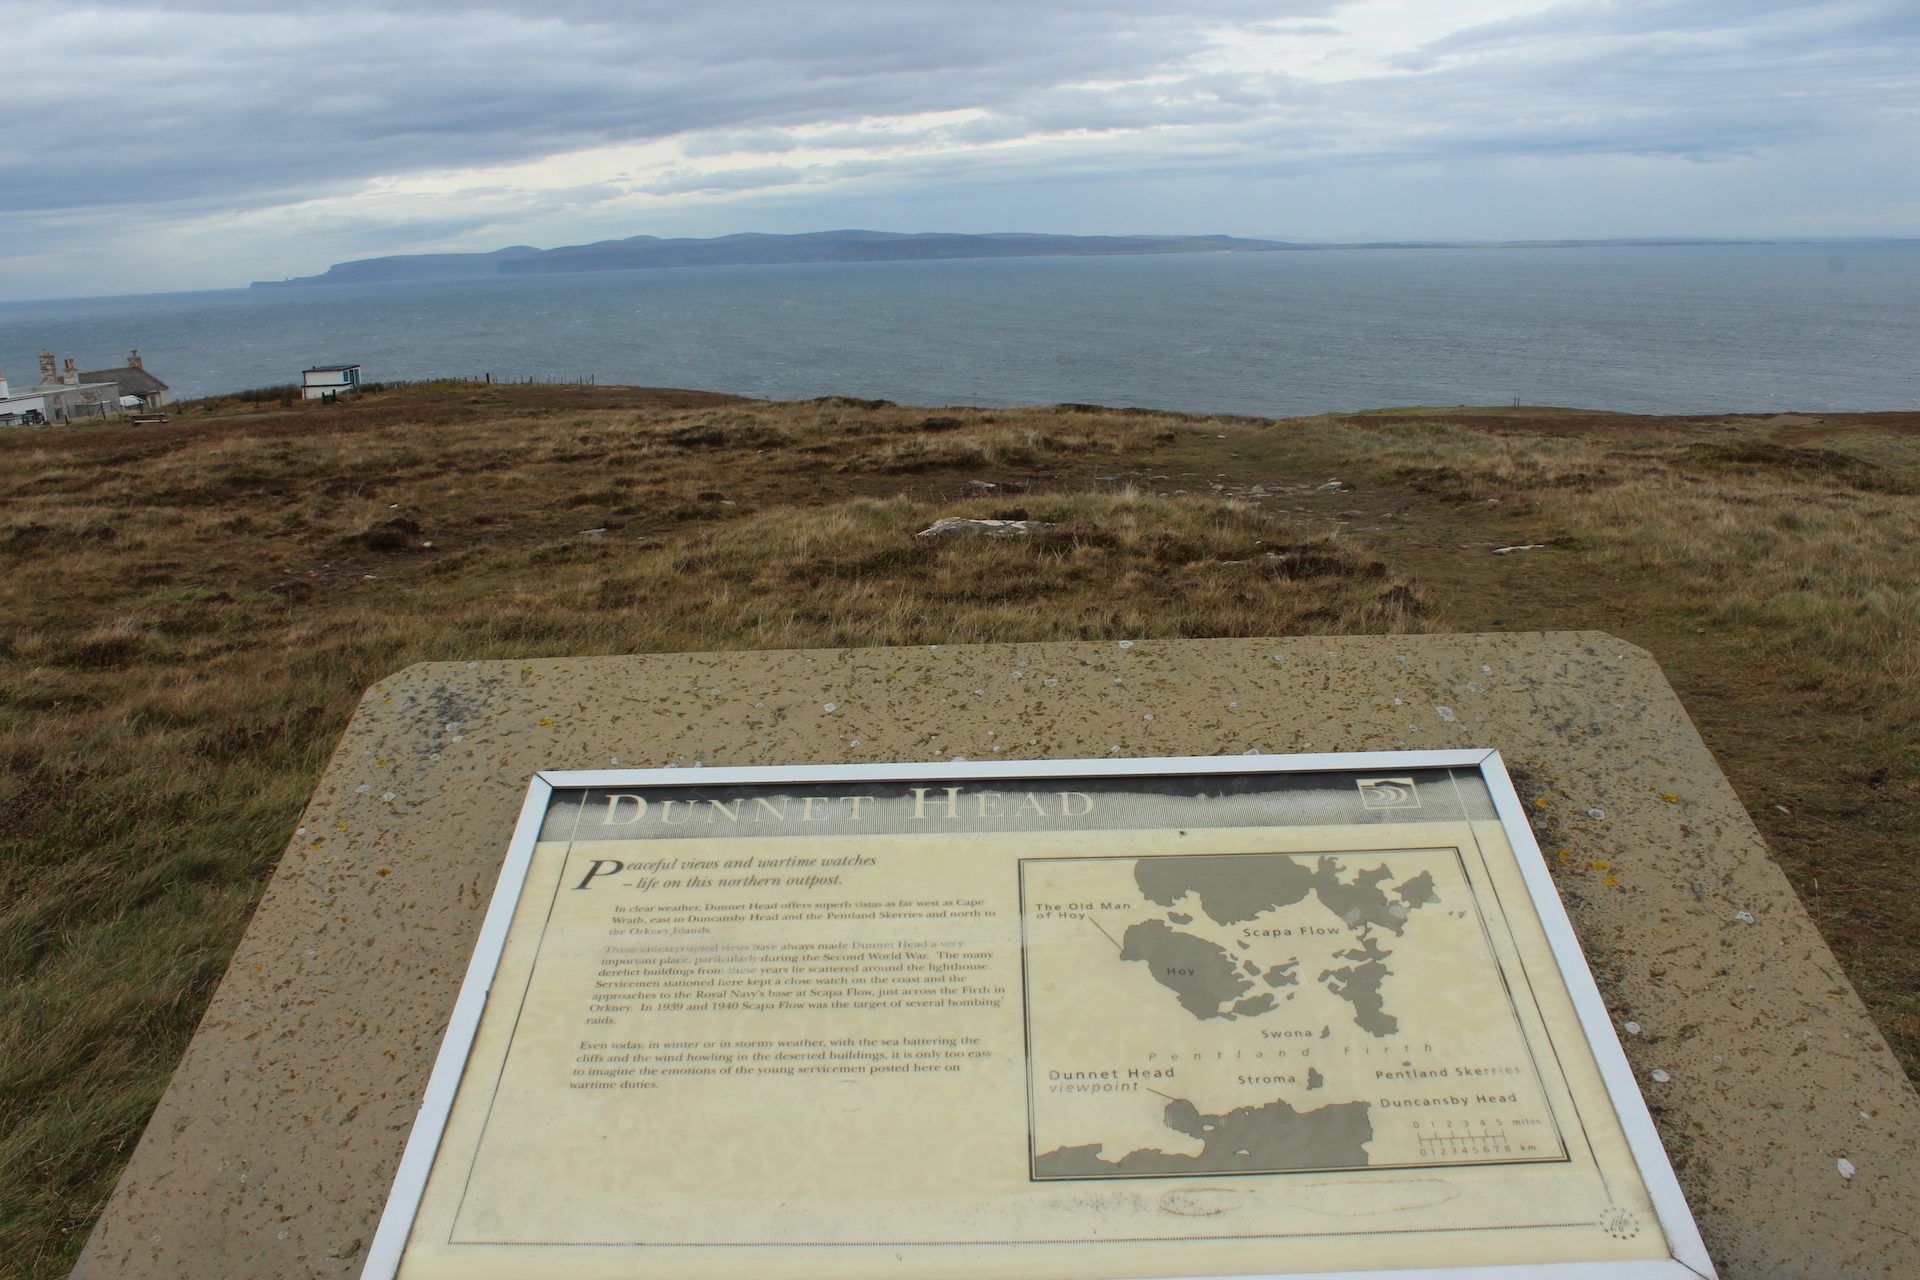 Dunnet Head - north